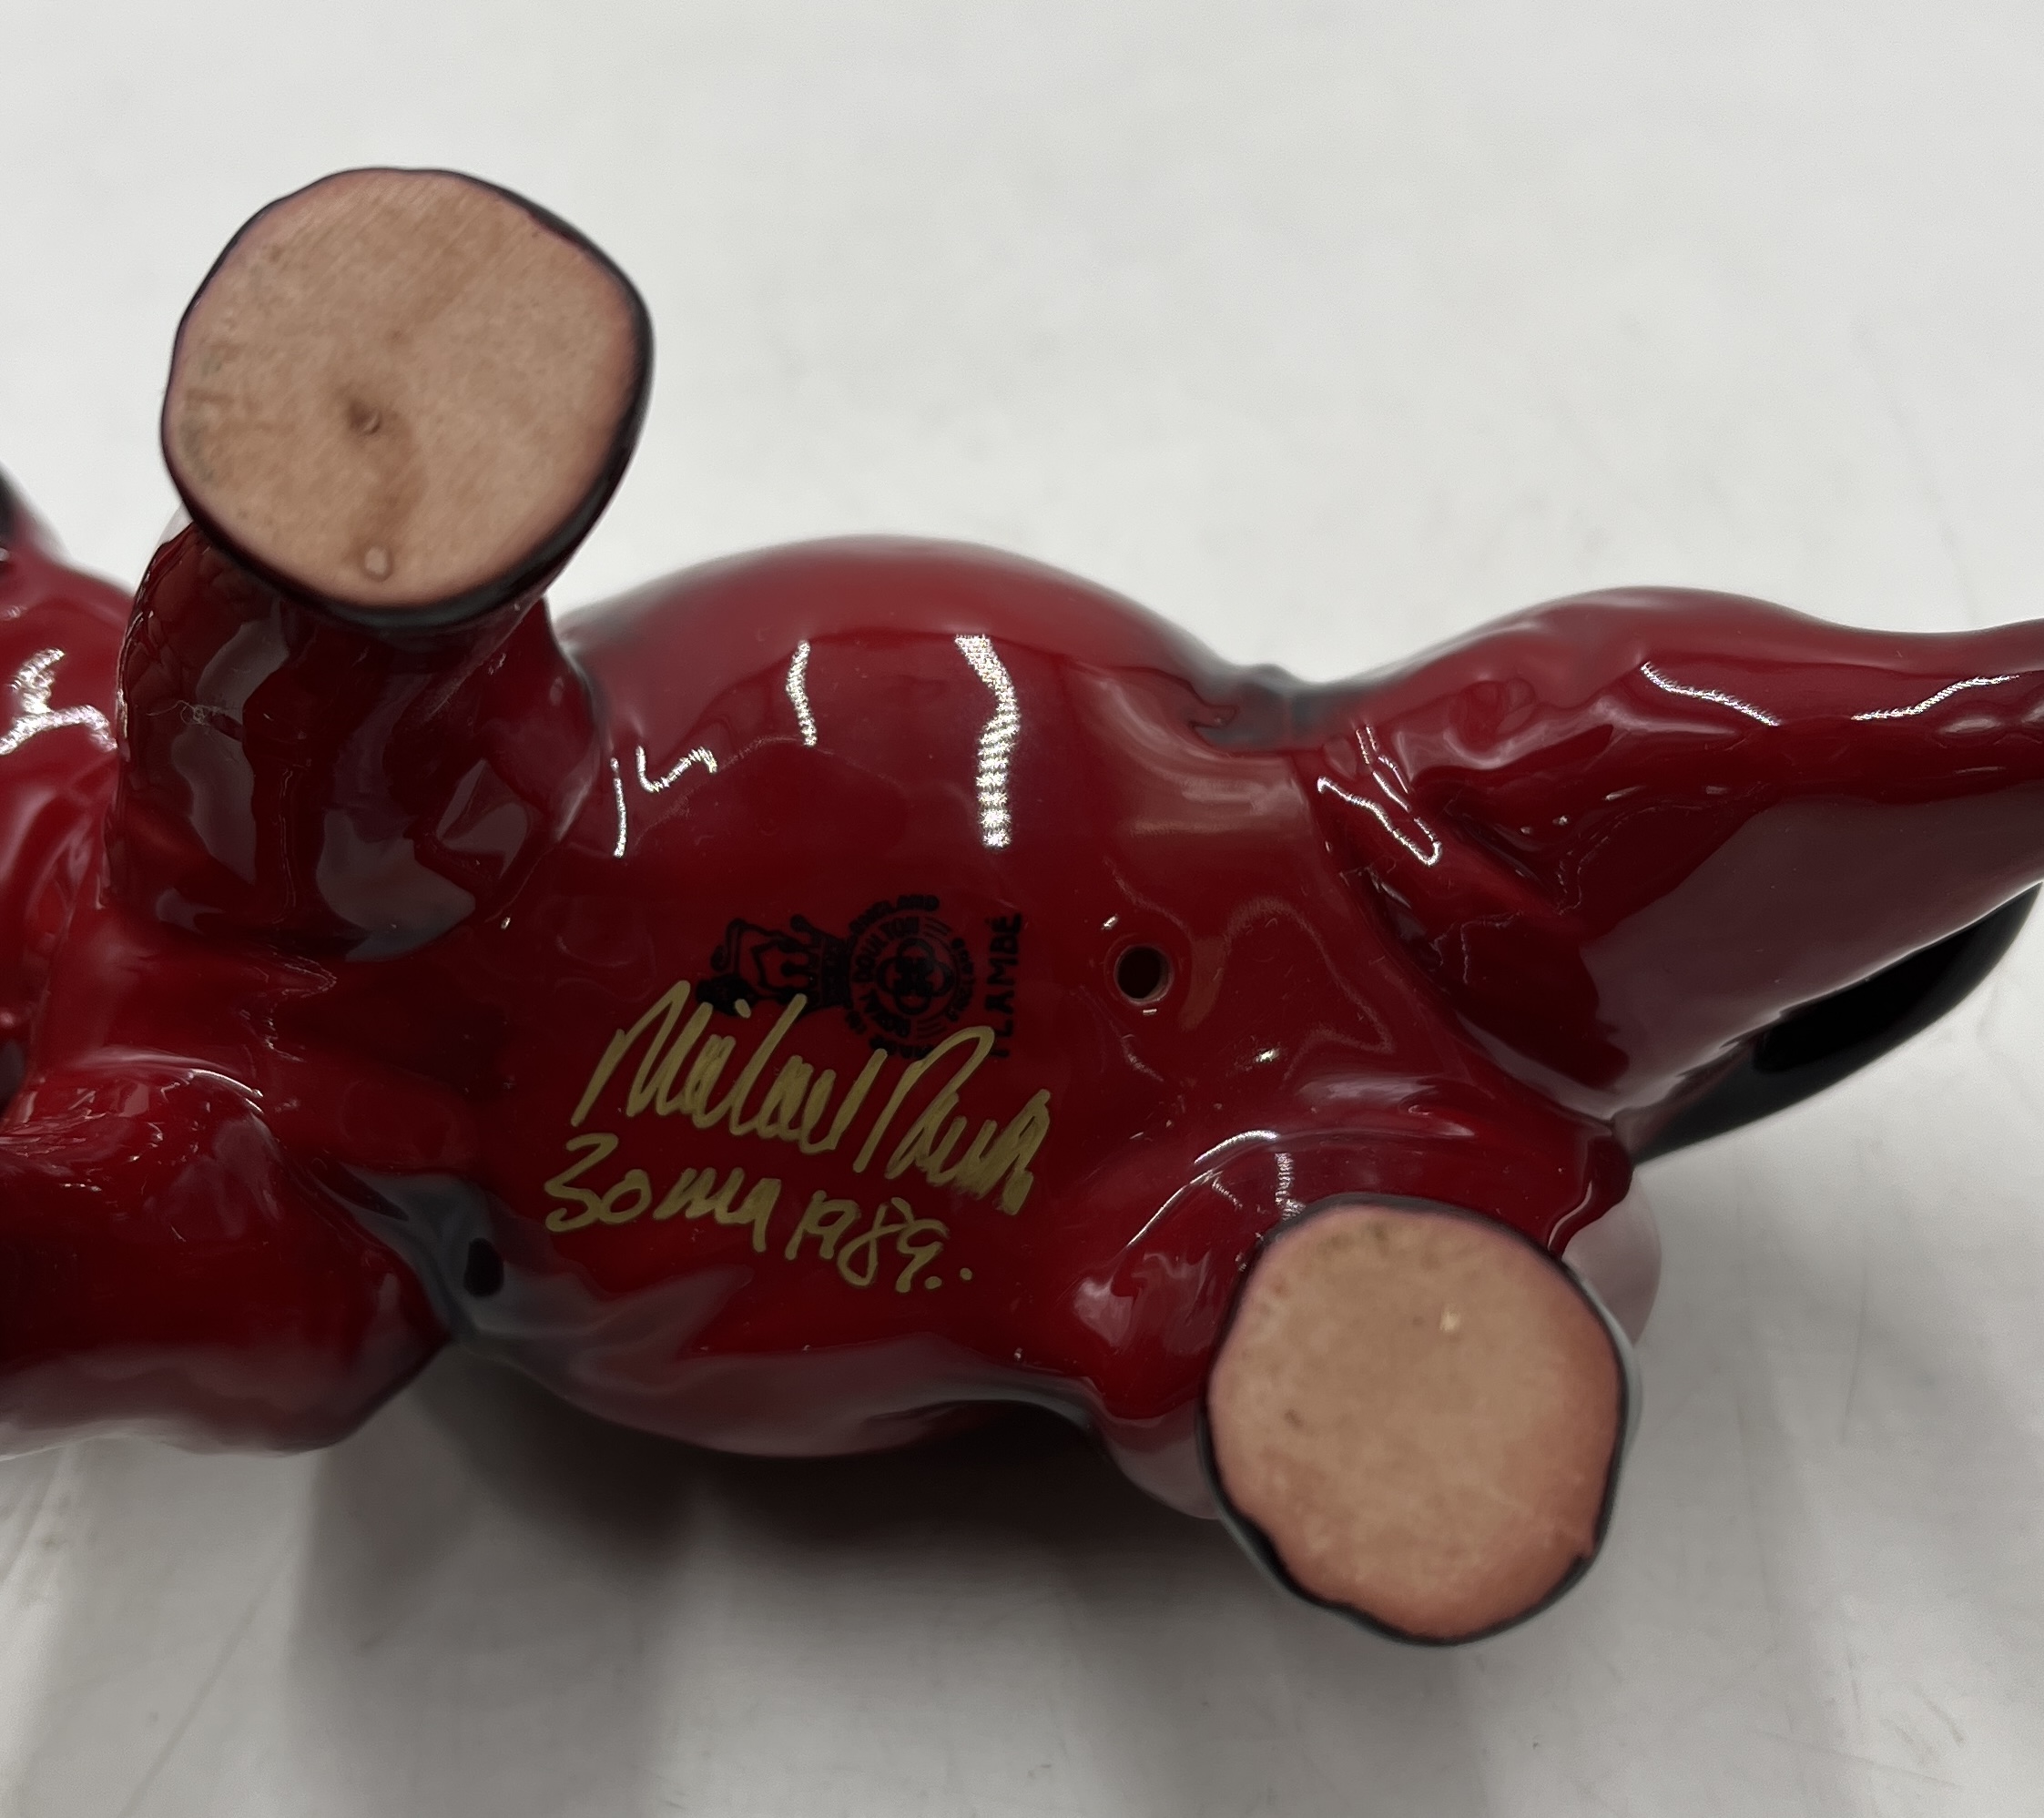 A Royal Doulton Flambe elephant with raised trunk signed by Michael Doulton in gold to the base - Image 4 of 4